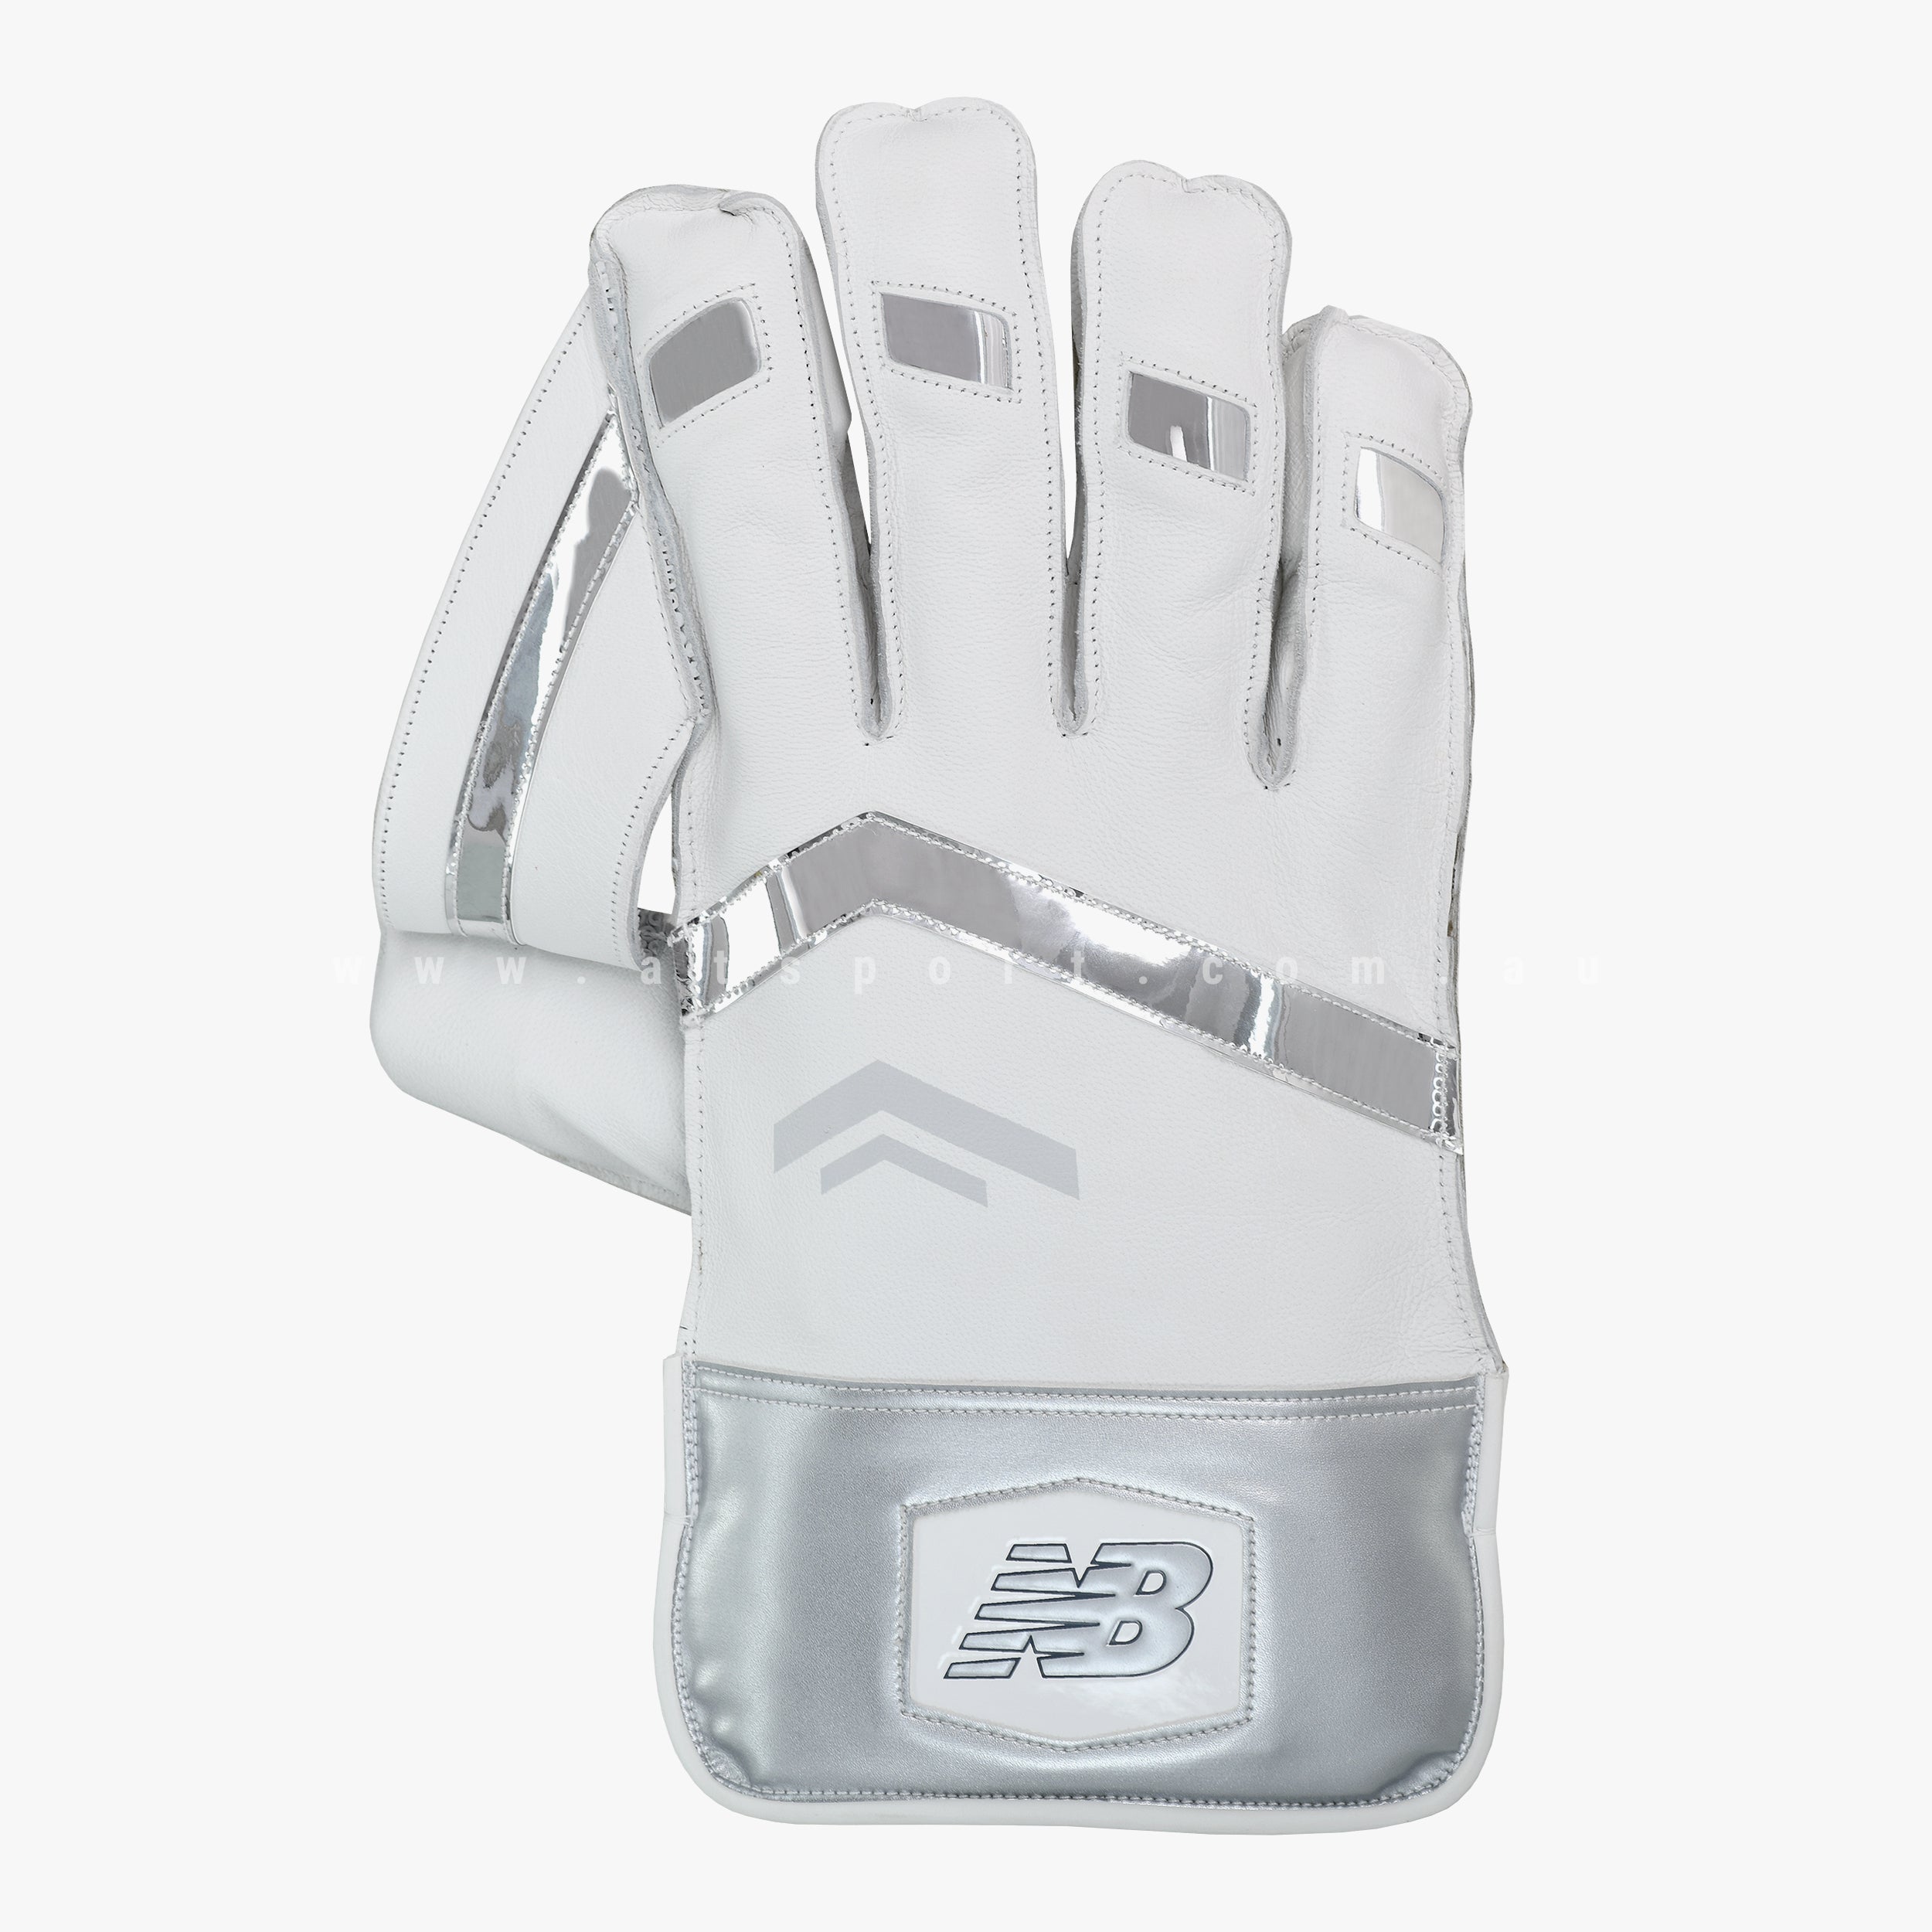 New Balance TC 1260 Wicket Keeping Gloves - ADULT